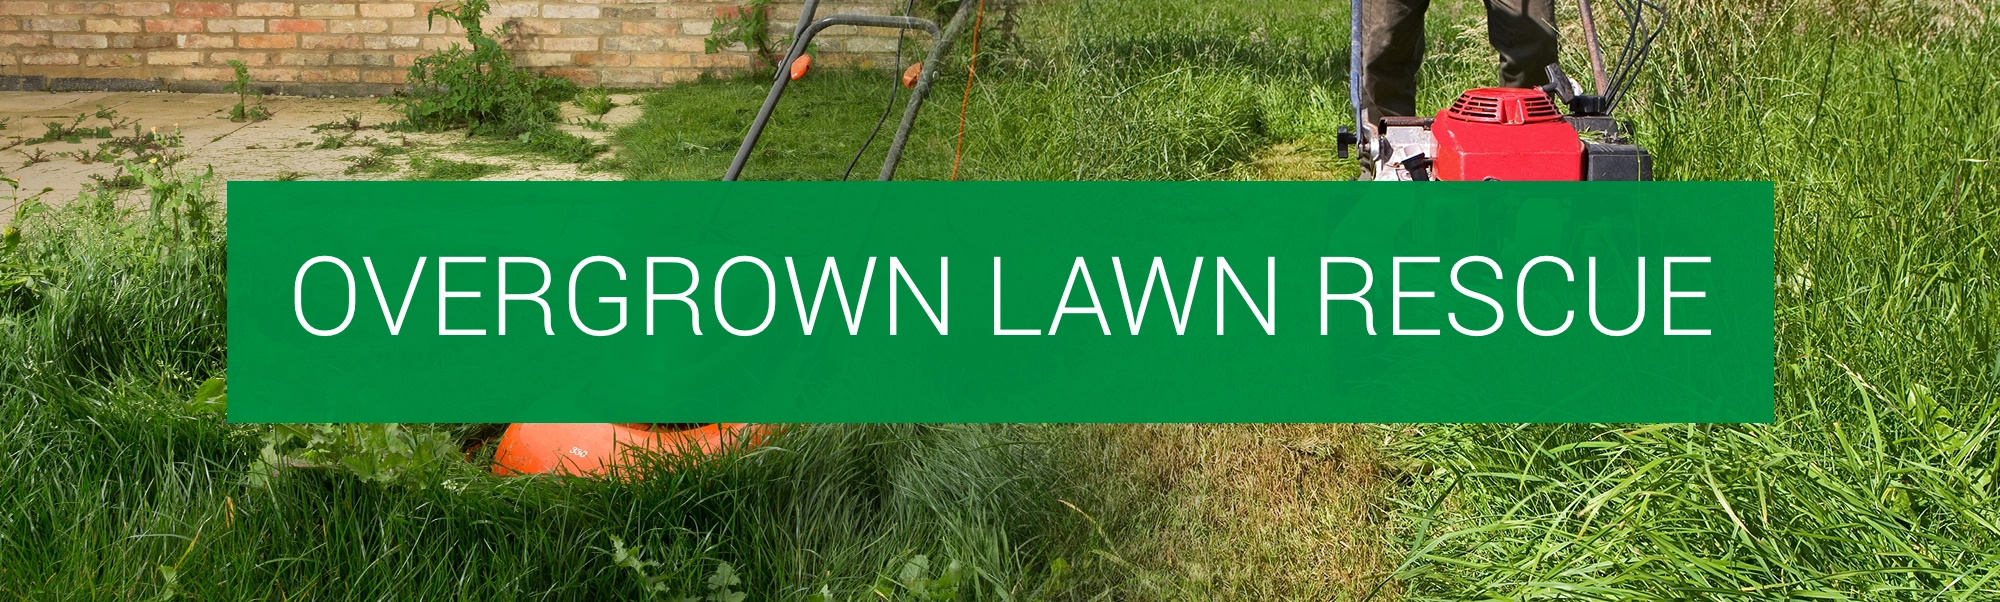 Lawn Care Services in  - Mowing